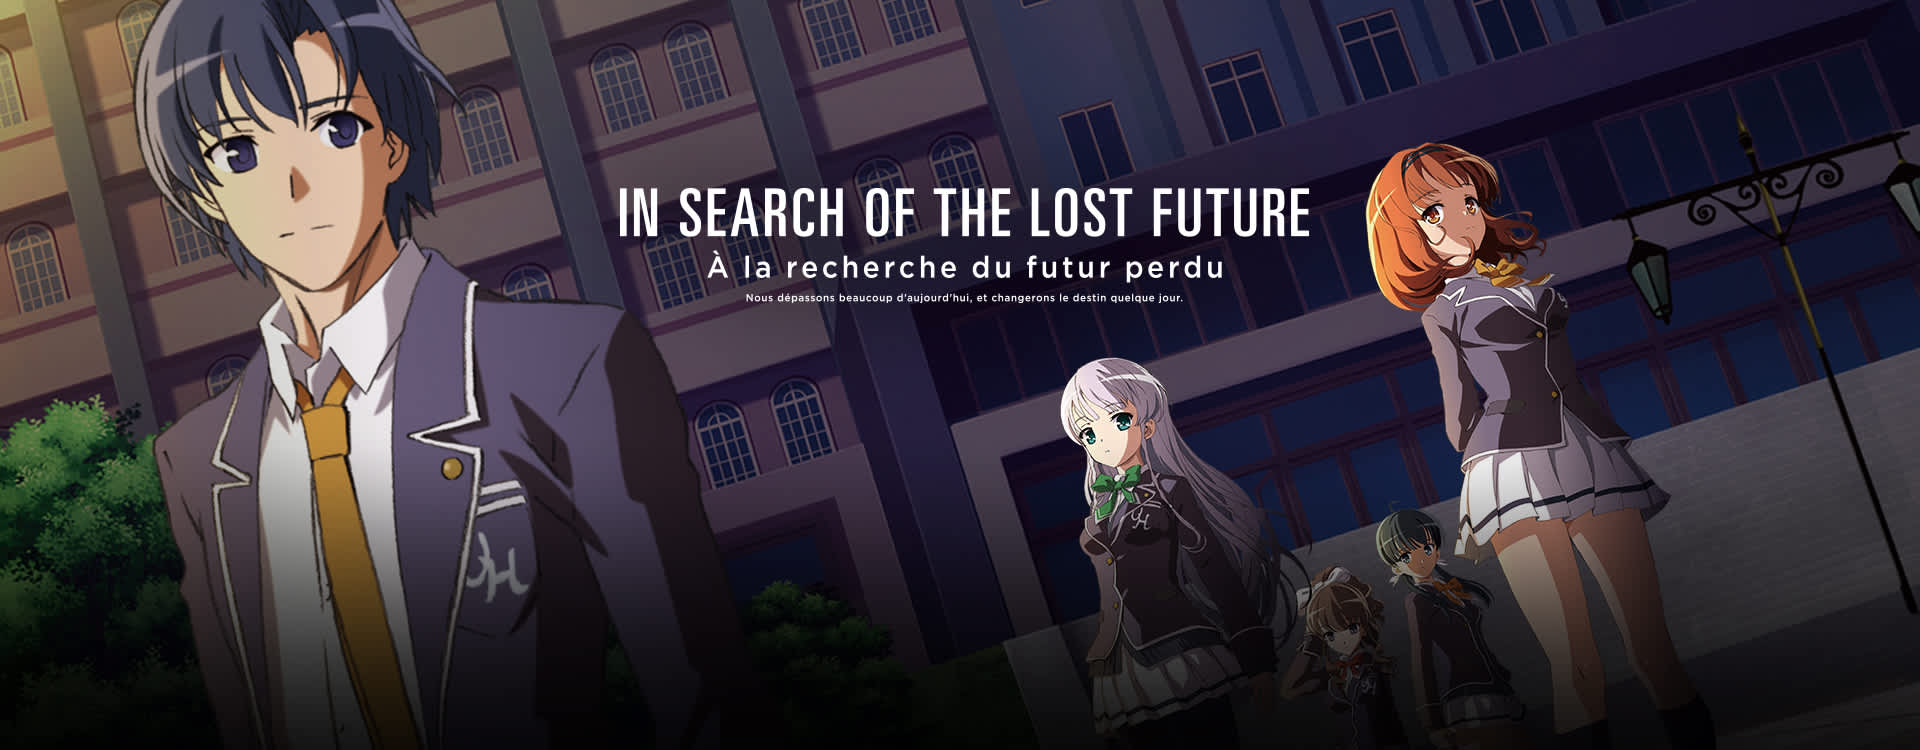 free download in search of the lost future anime